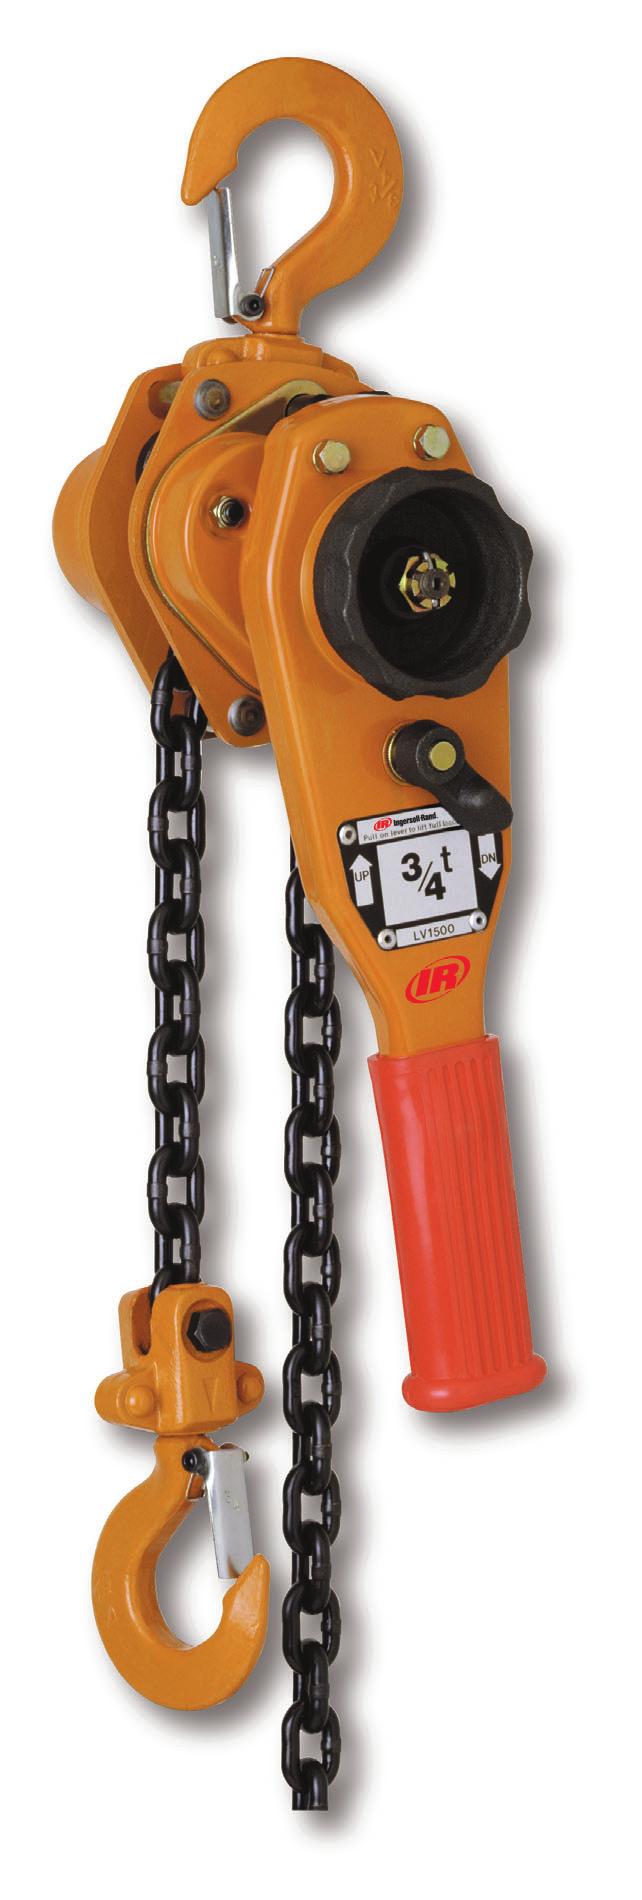 LV Classic Series Lever Chain Hoist 3/4 6 metric ton Line Pull Capacity Lever Chain Hoists rugged, dependable lever chain hoist with capacities and features that make it ideal for all industrial